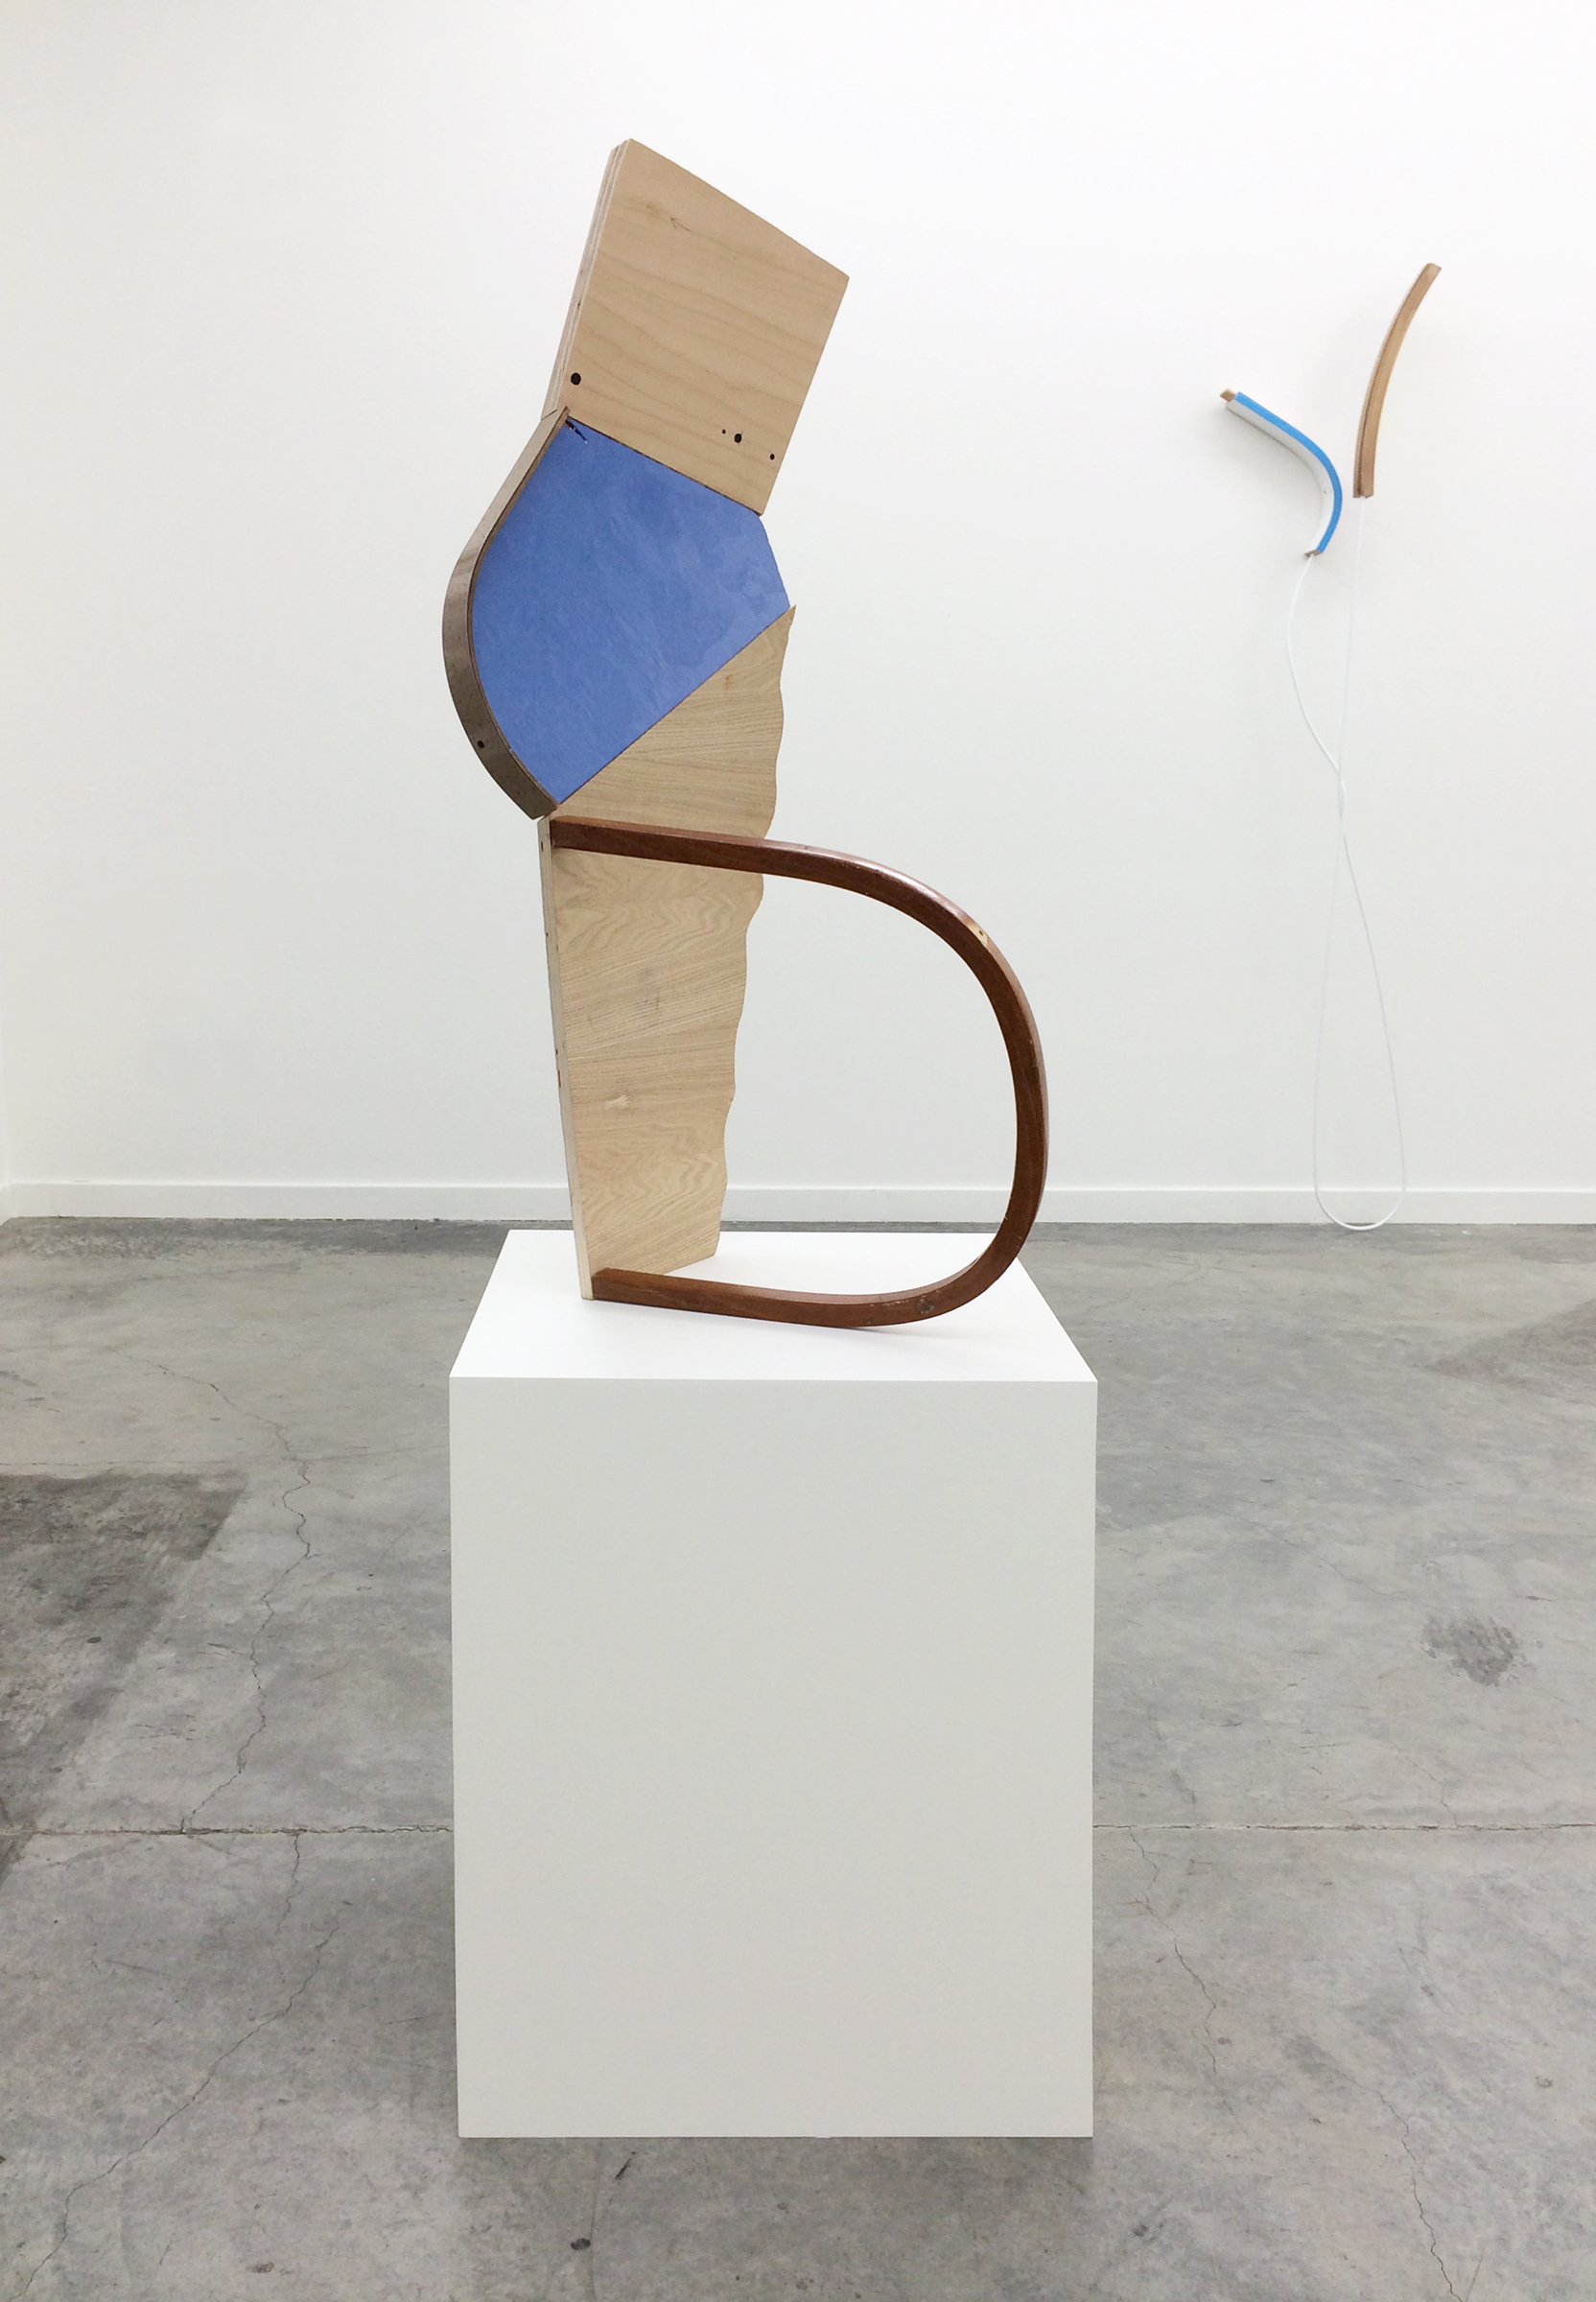   KIRK STOLLER  (alternate view)&nbsp; Untitled (shift) , wood, resin, acrylic and latex paint, wood stain, 35" x 17" x 16"   